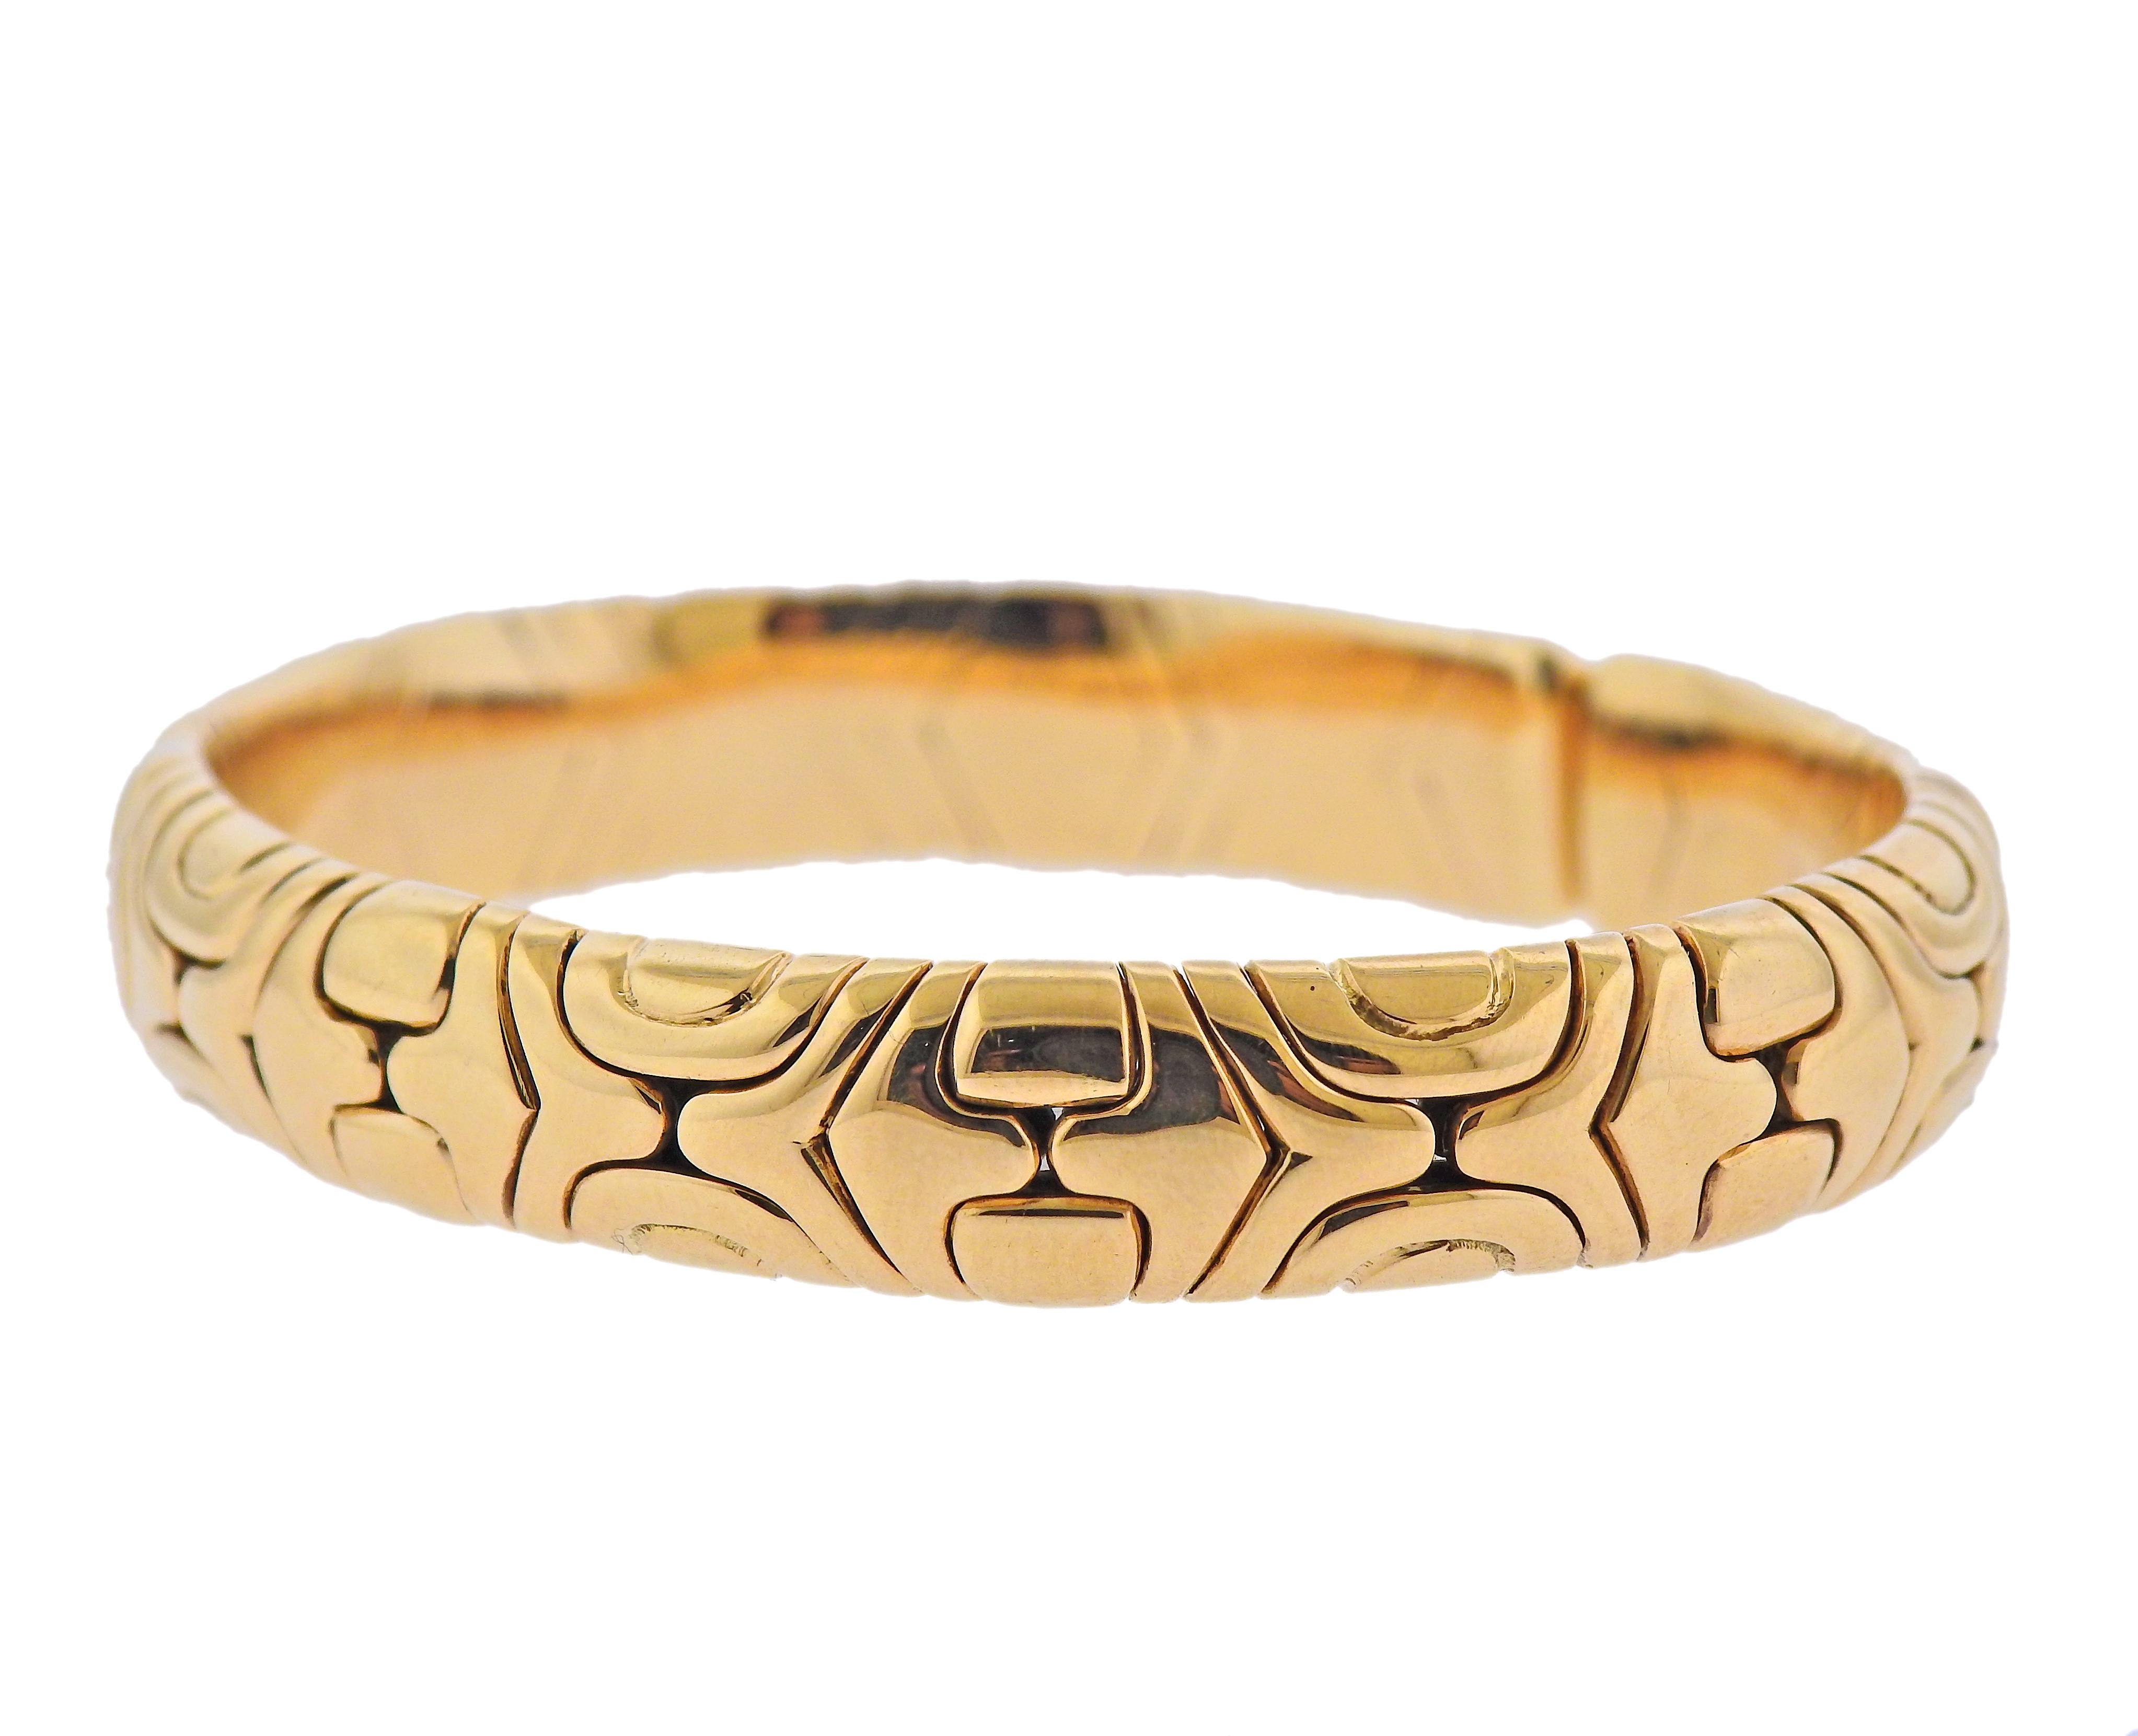 18k gold Alveare bracelet by Bvlgari. Will cit up to 7